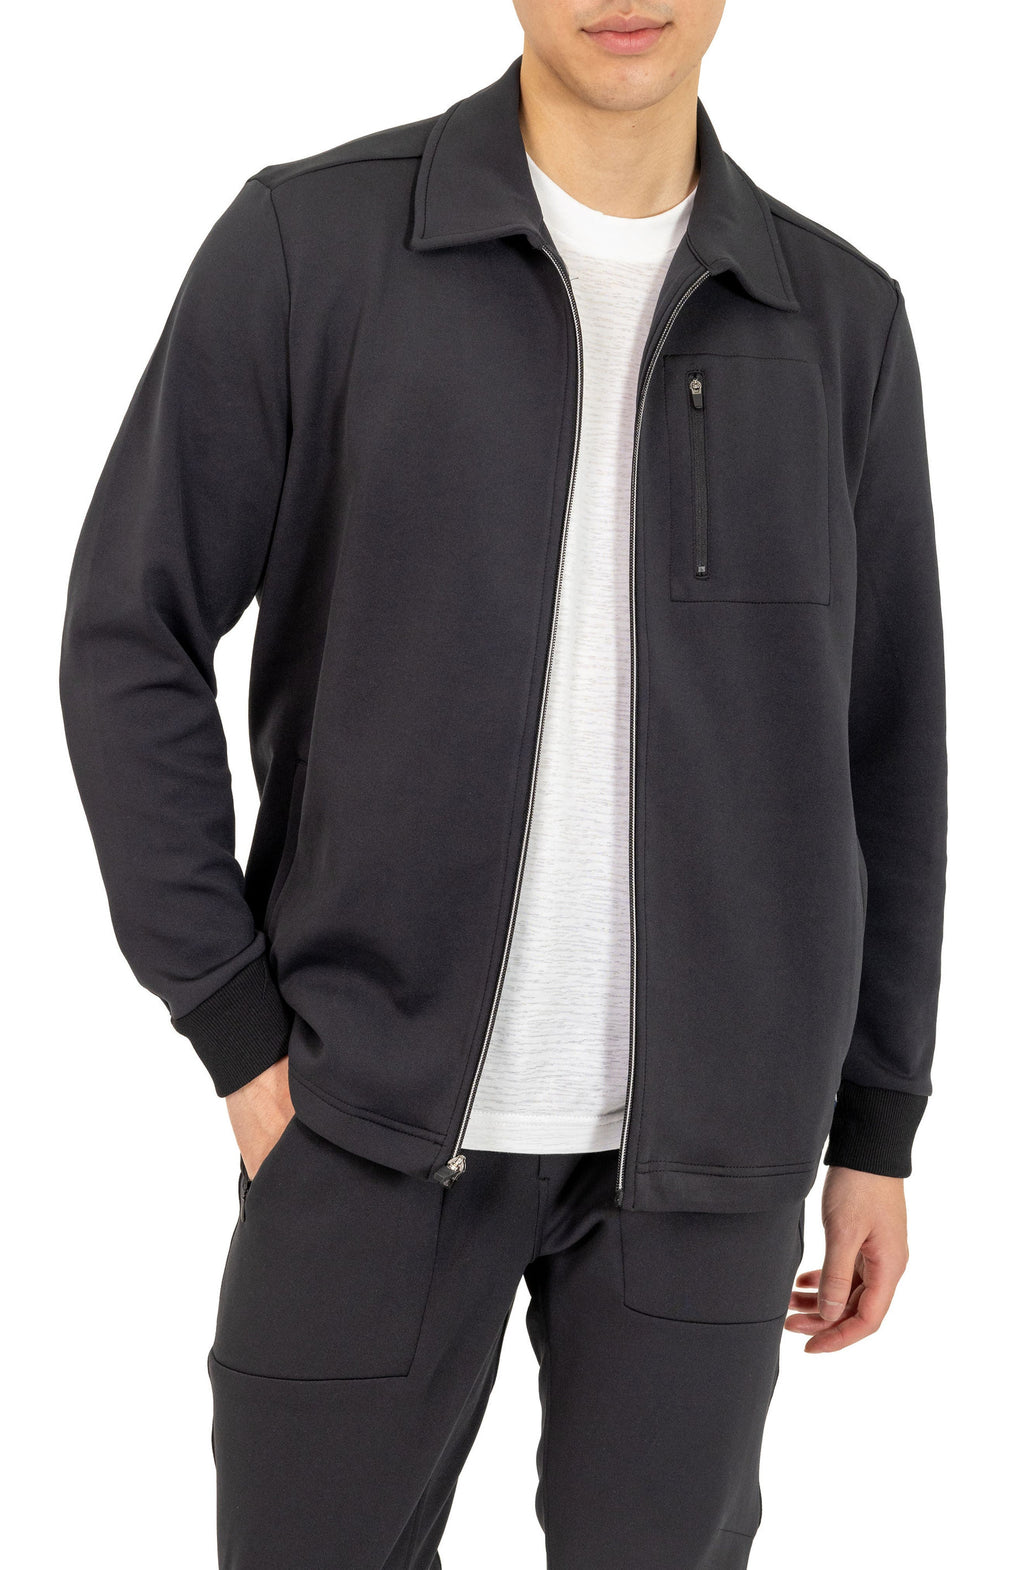 PINO BY PINOPORTE Stretch Cotton Blend Jacket, Main, color, Black